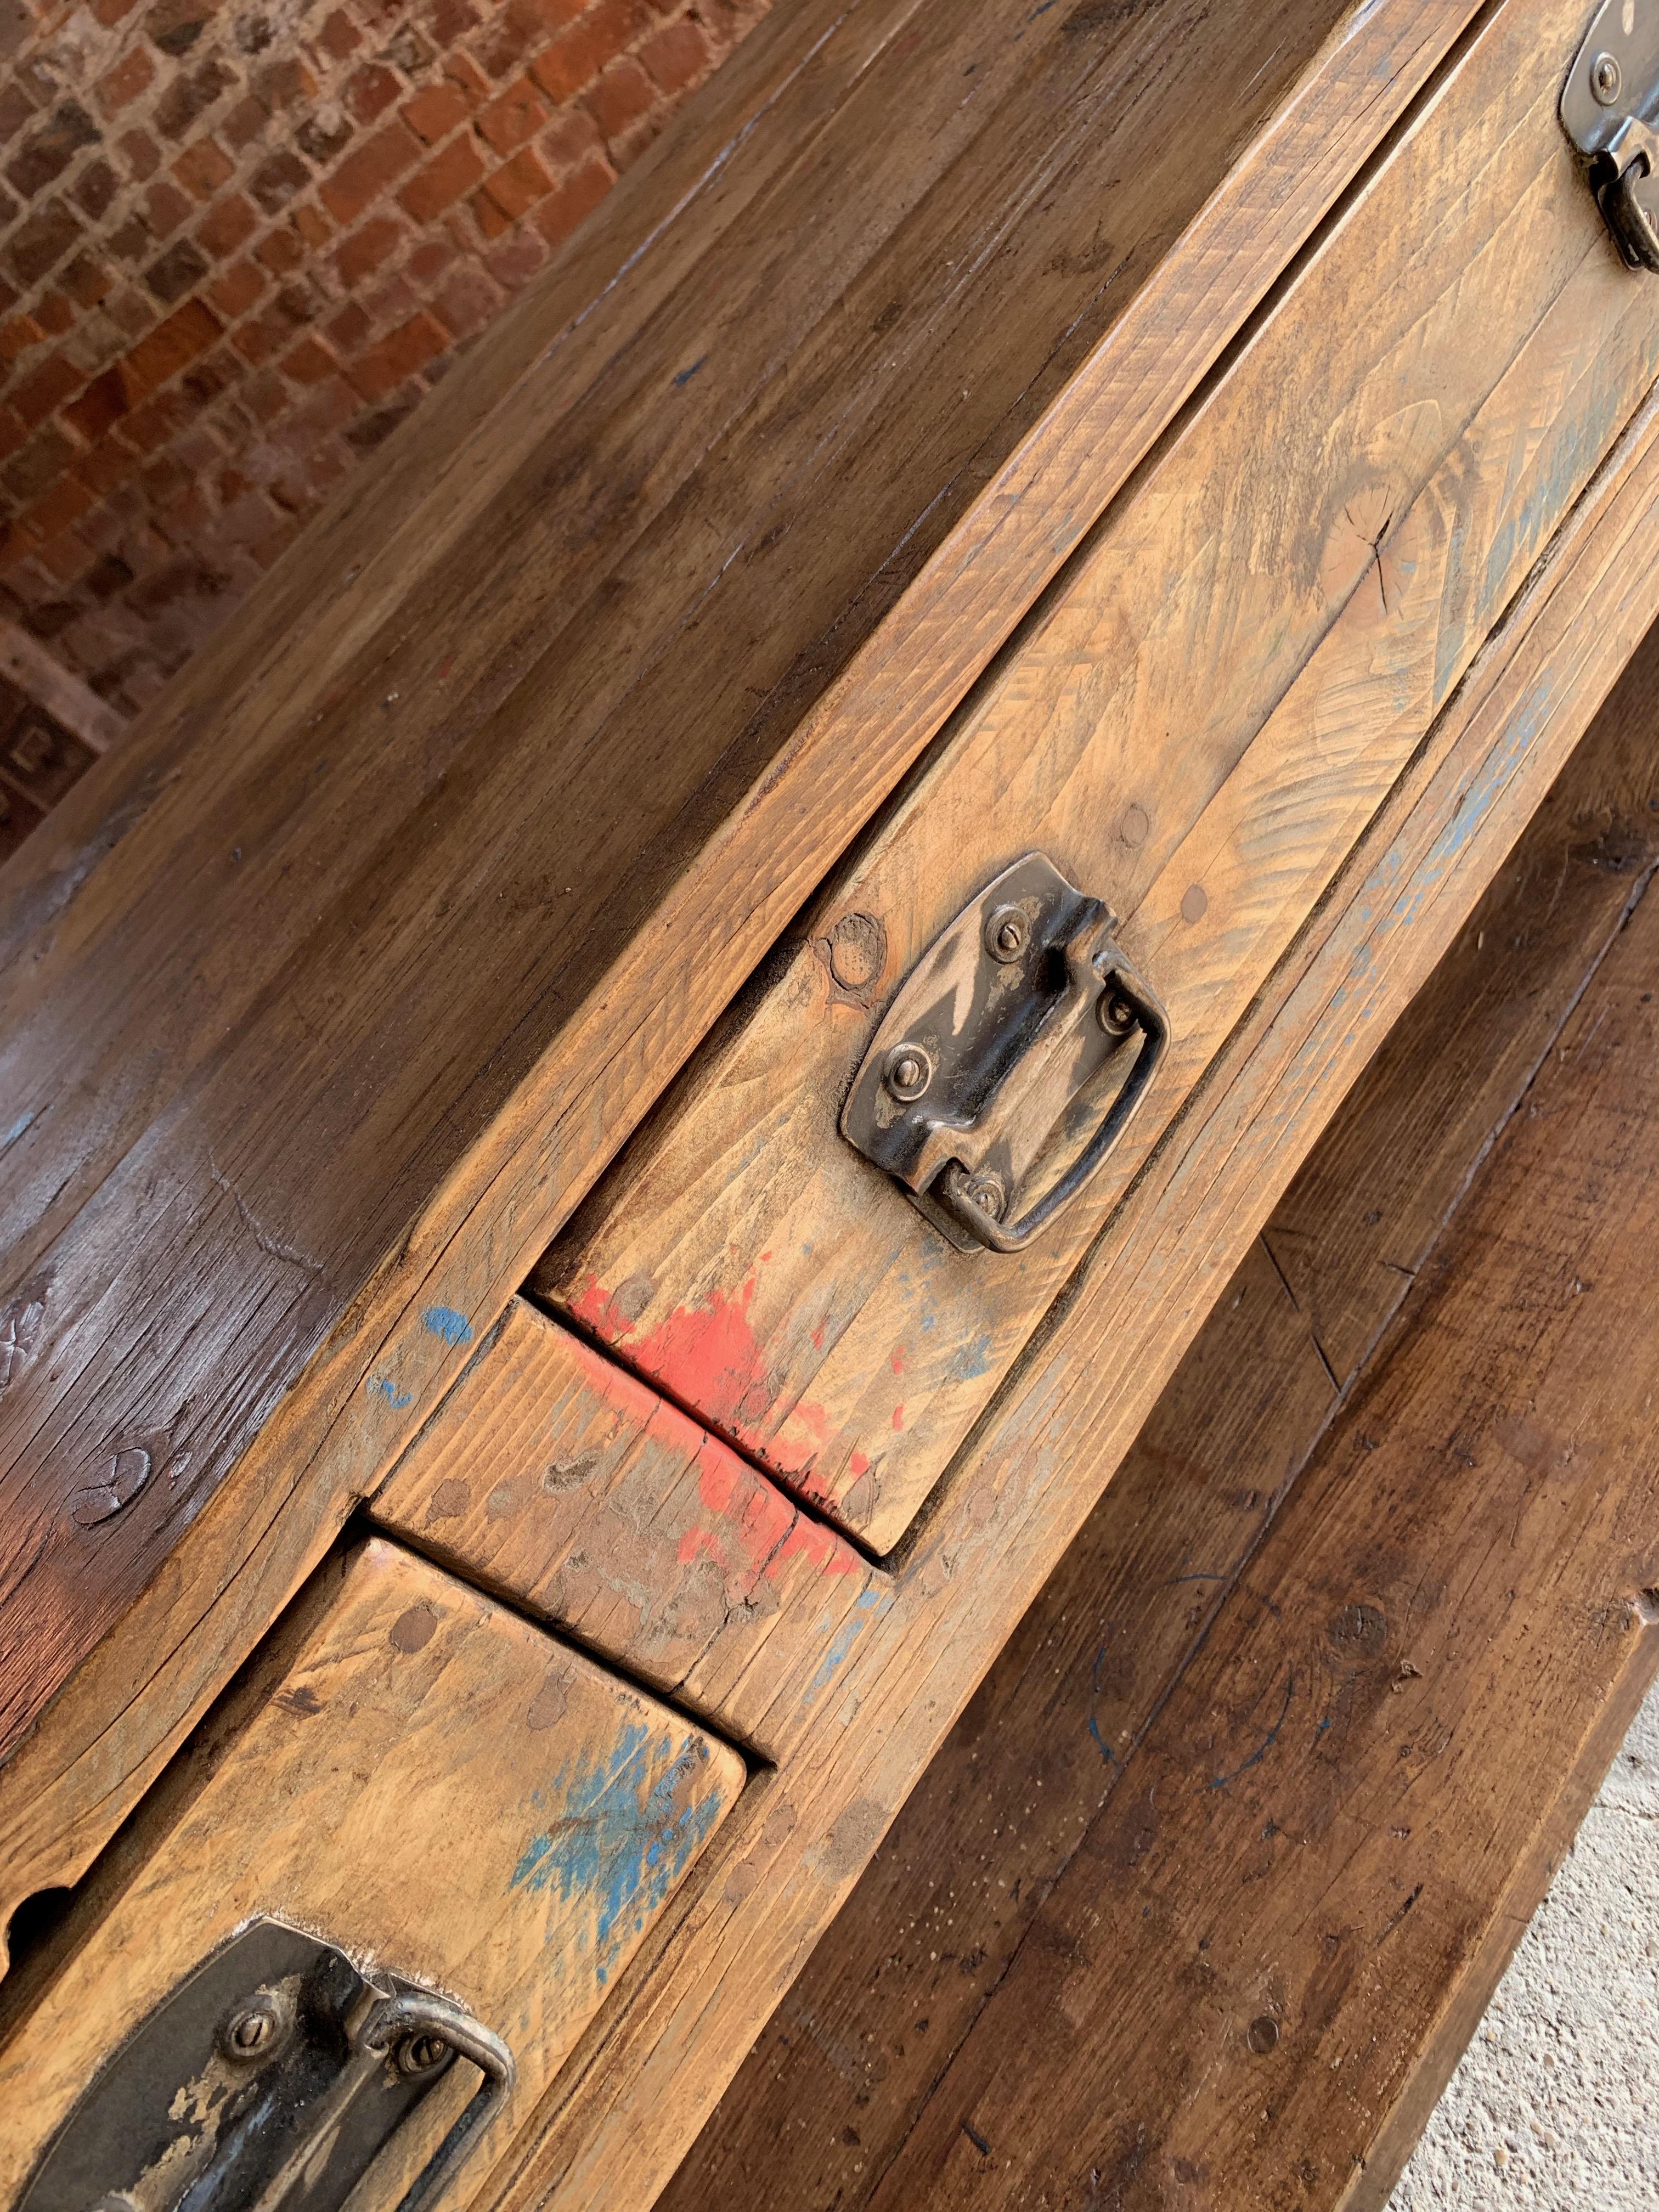 Industrial table oak and pine work bench sideboard distressed loft style antique 

Magnificent large and imposing solid oak and pine work bench or table, made from reclaimed oak rafters from a 17th century chapel in the heart of Somerset were the